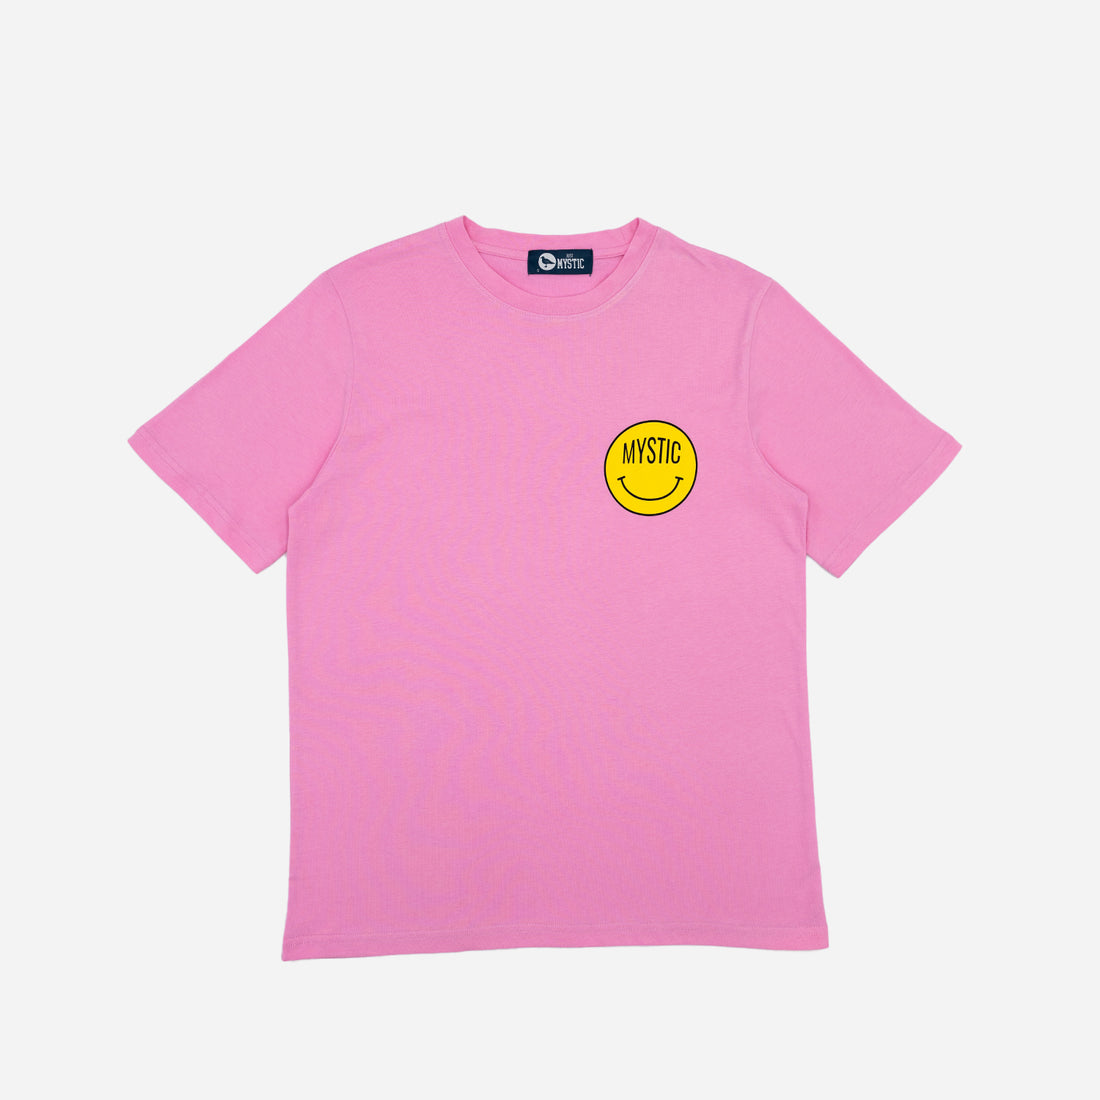 Mystic Smiley T-Shirt in Pink